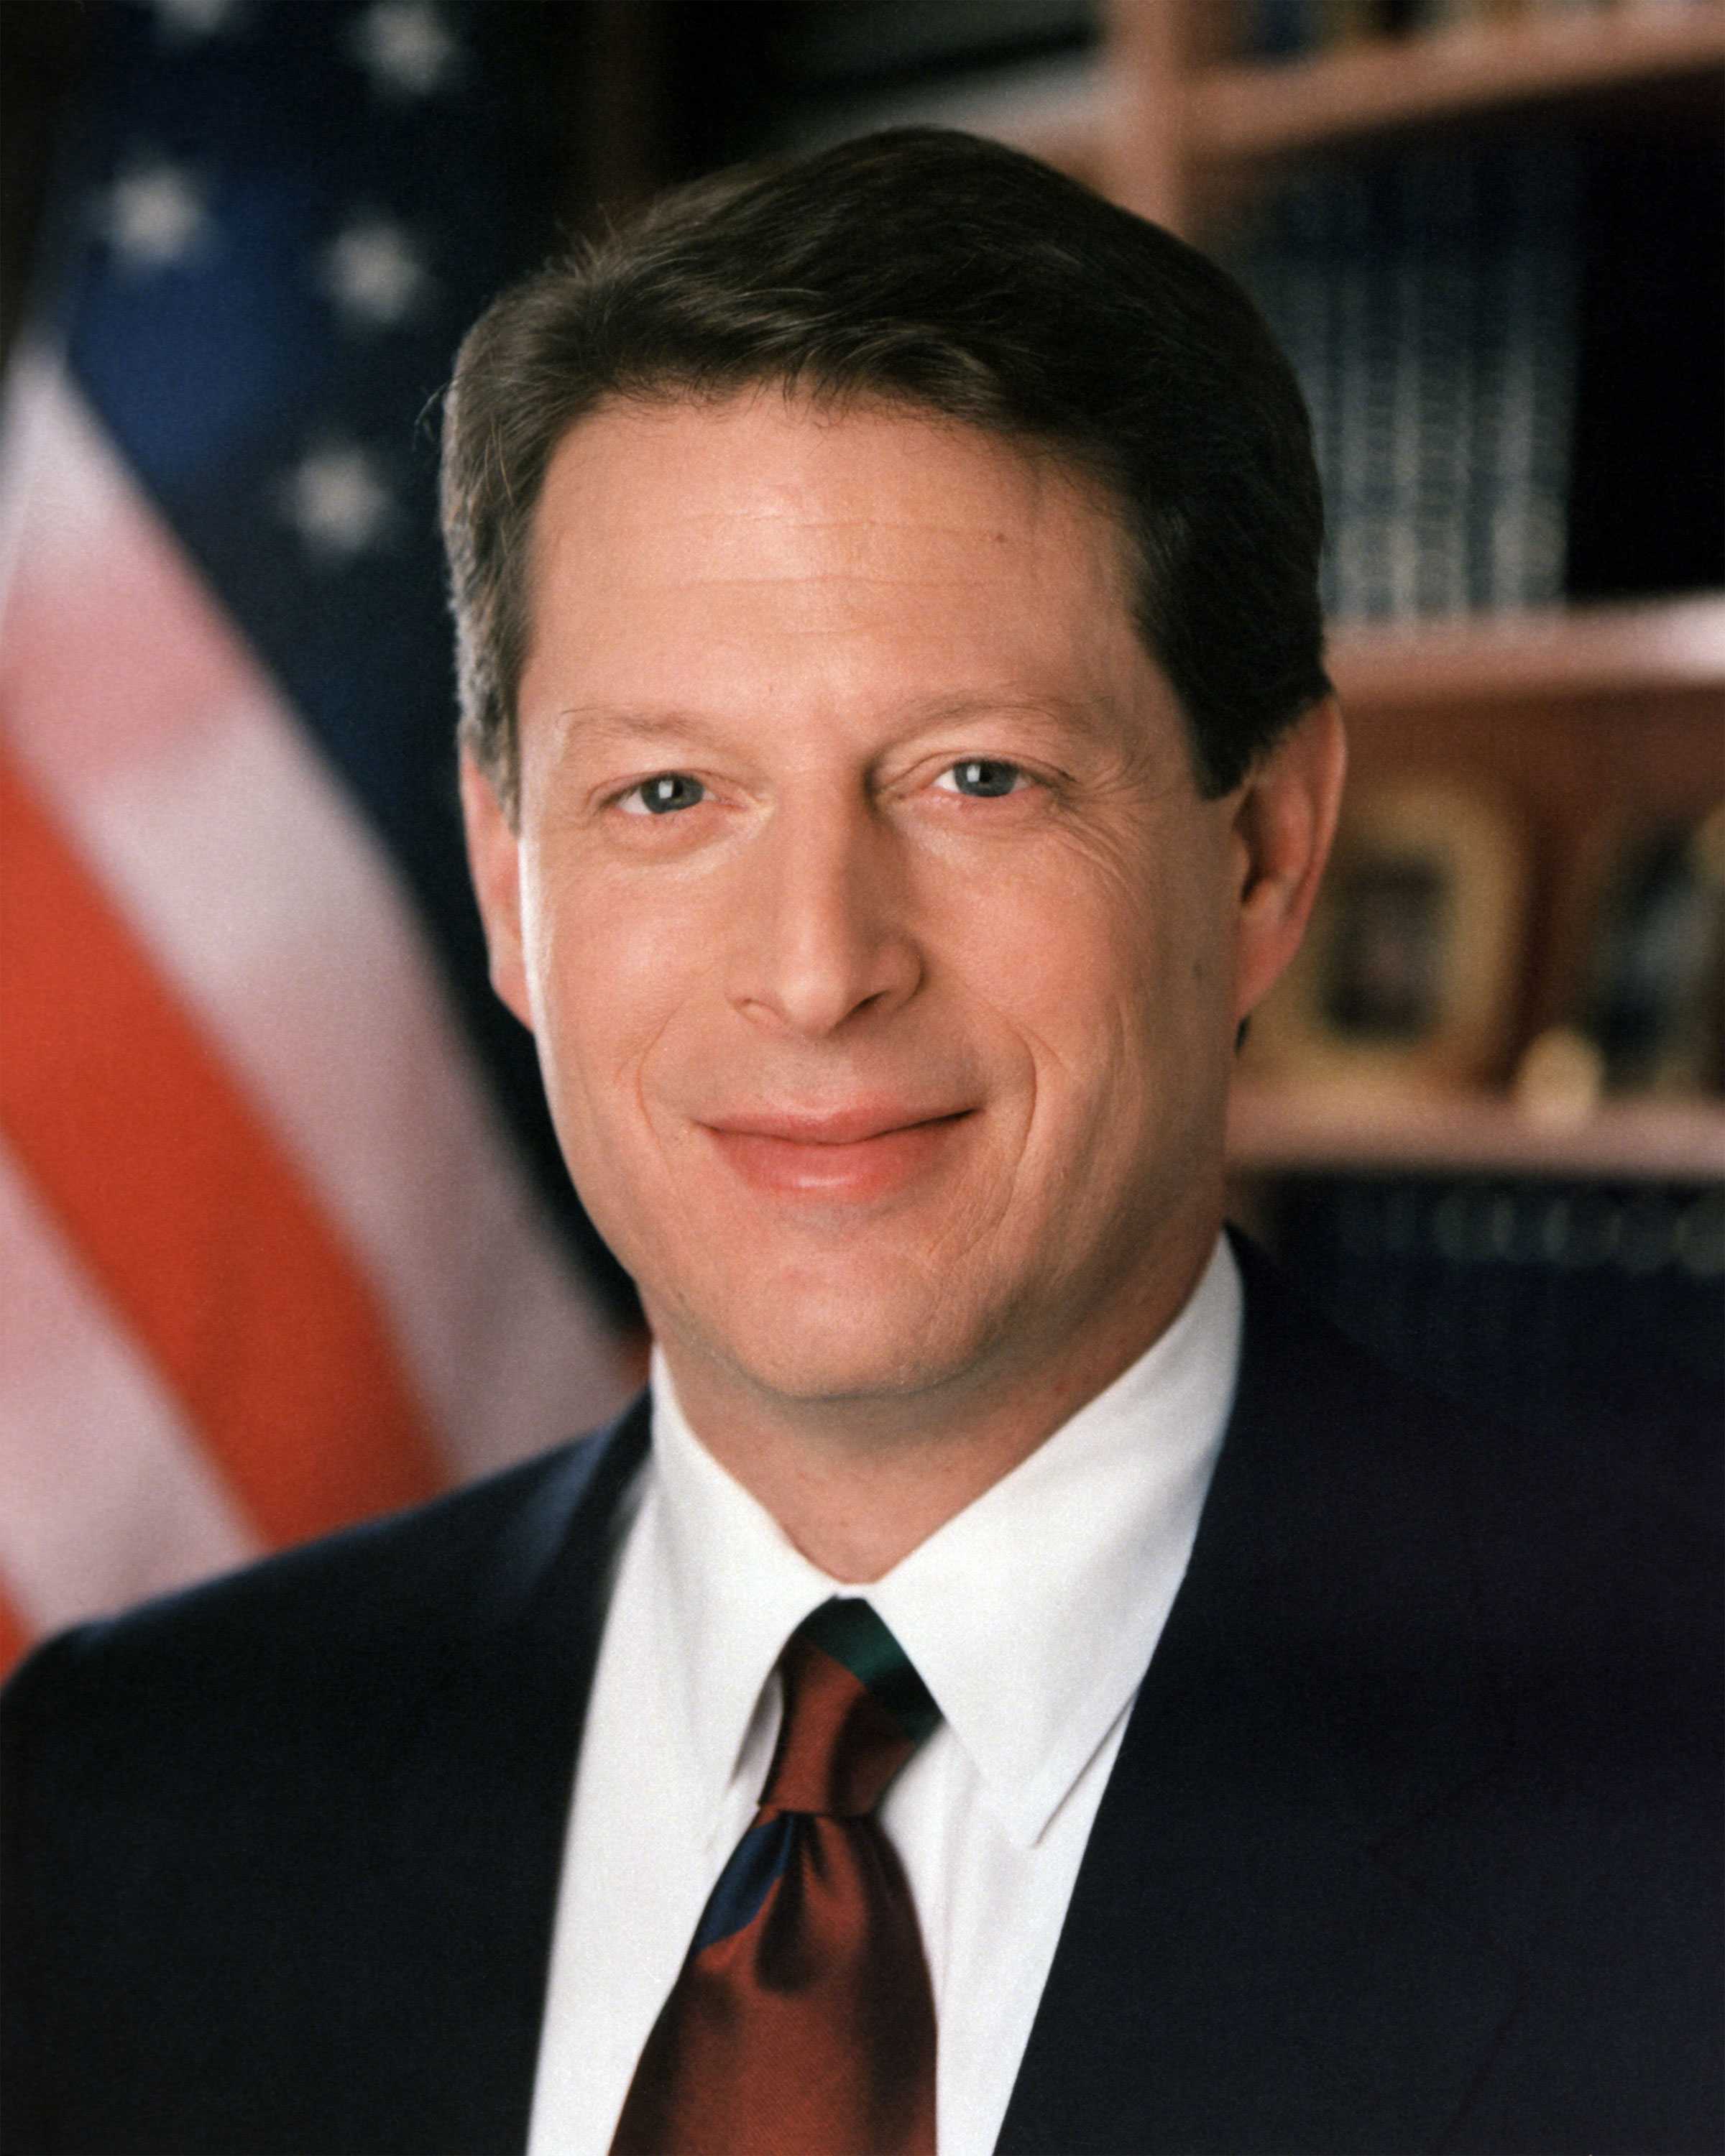 Al_Gore%2C_Vice_President_of_the_United_States%2C_official_portrait_1994.jpg